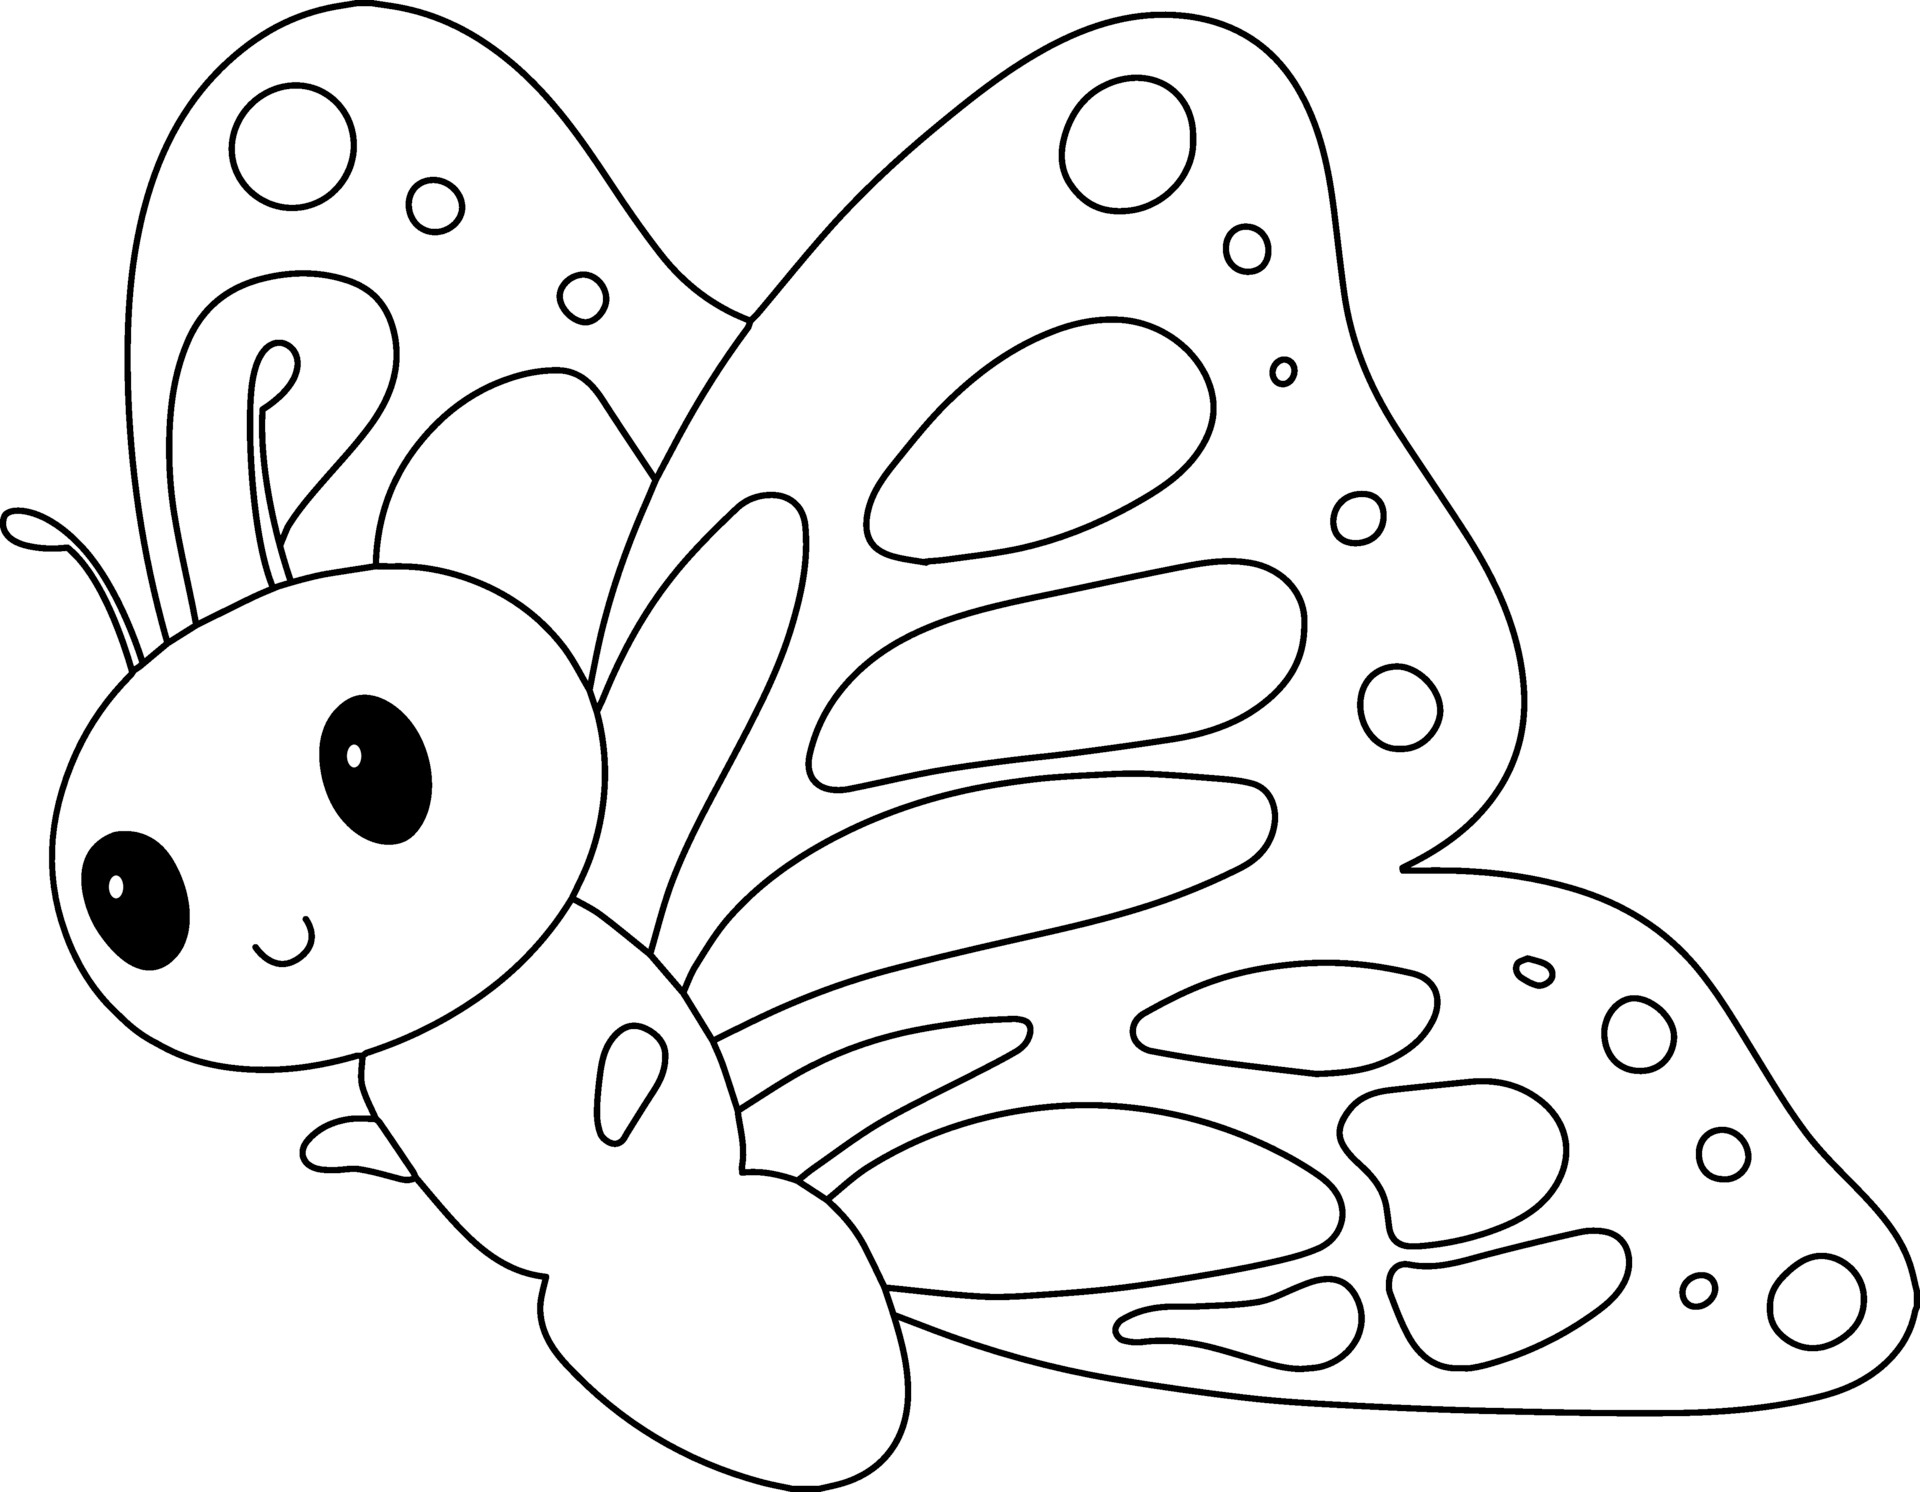 Risultati Immagini Per Farfalle Disegni Insect Coloring Pages Animal Coloring Pages Butterfly Coloring Page